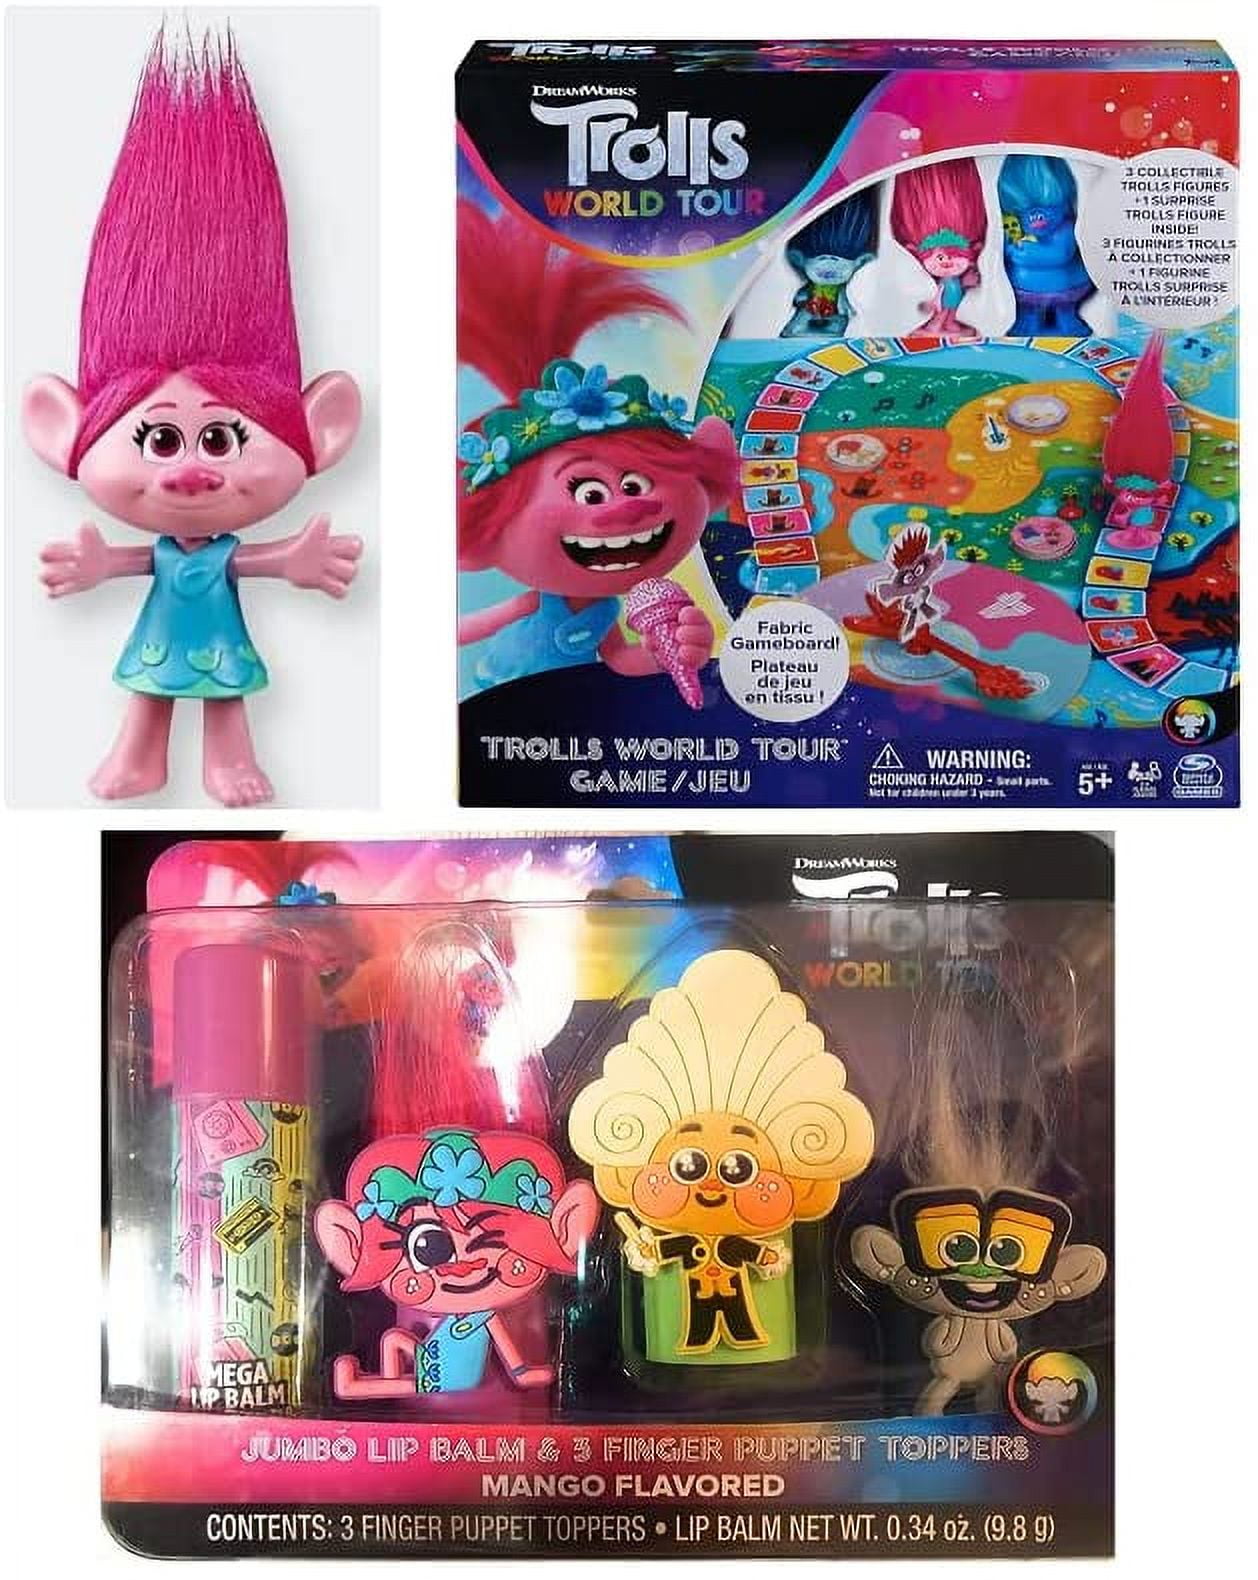 DreamWorks Trolls Surprise Mini Figure, Series may vary  Mini figures,  Candy easter basket, Trolls birthday party